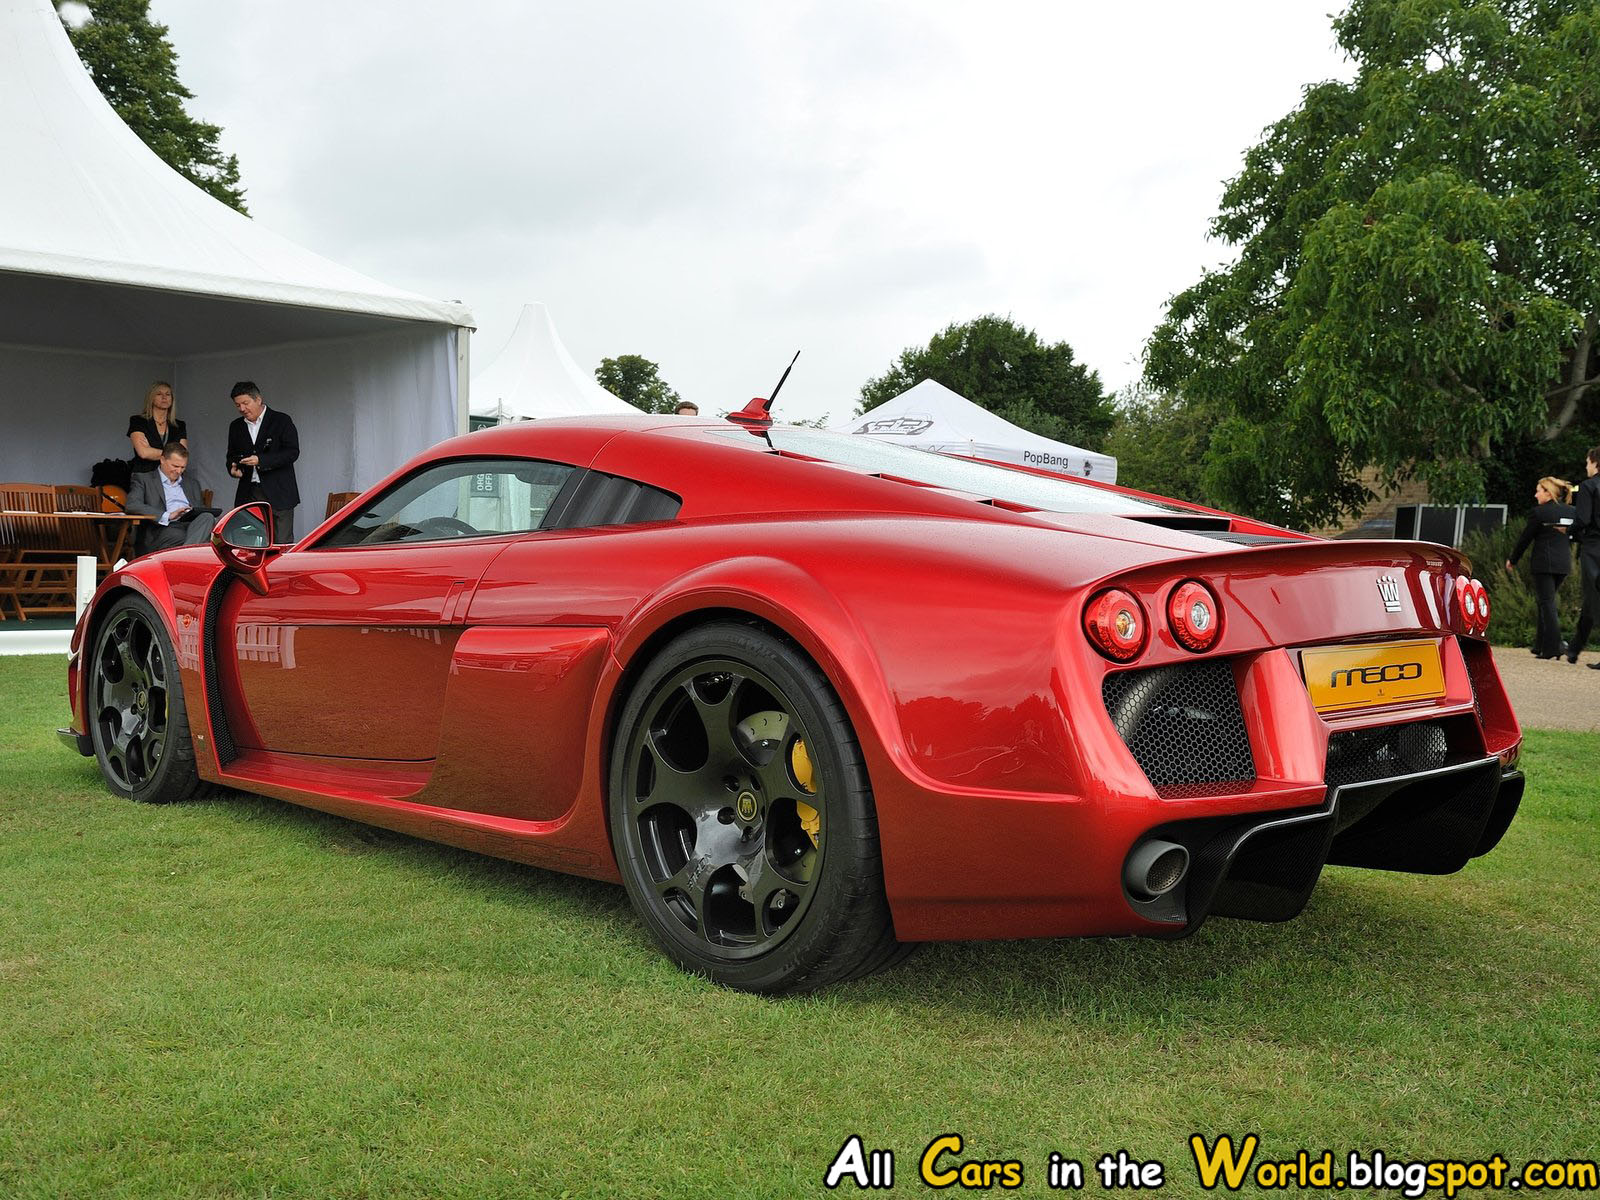 The 2011 Noble M600 ~ All Cars in the World